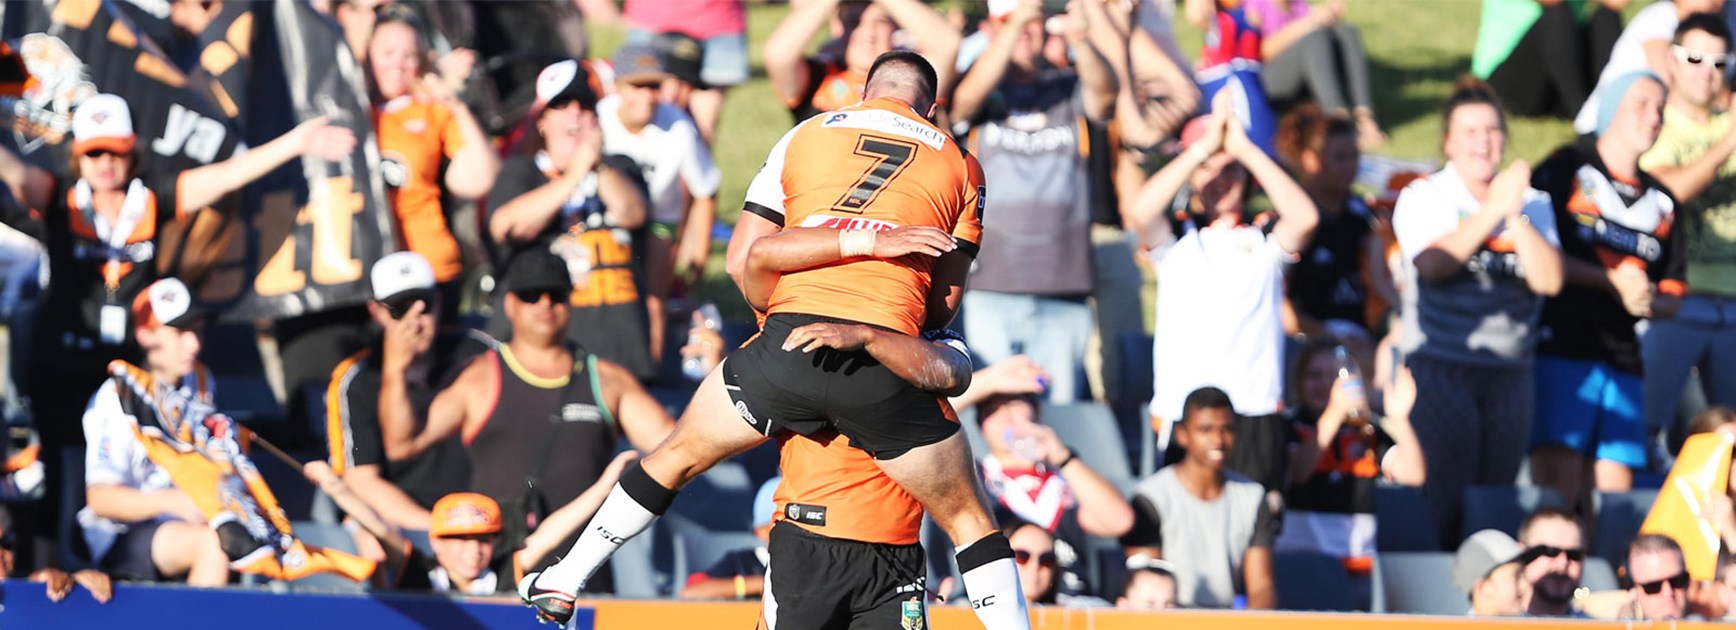 The Wests Tigers put on a show against the Warriors in Round 1.